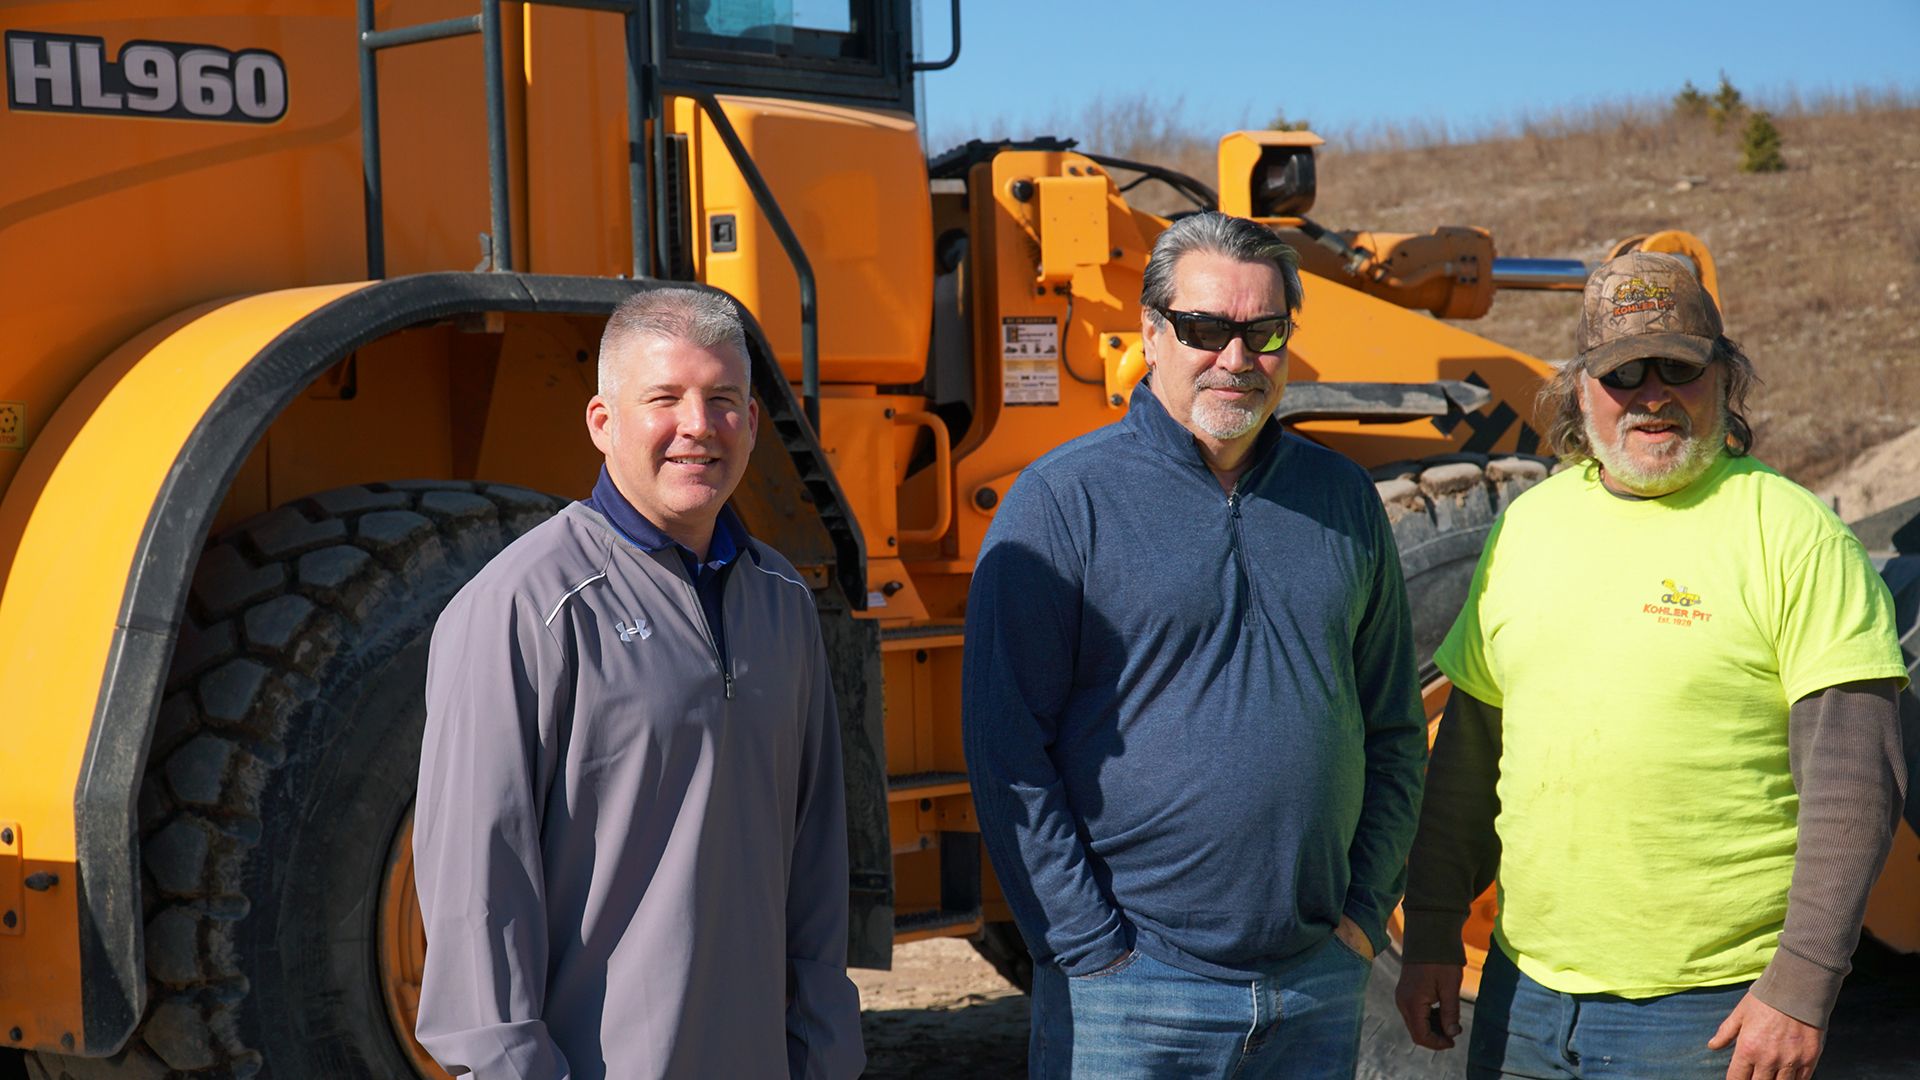 Ed Harseim, HCEA North Central District Manager, Jon Christine, Yes Equipment, Sales, and Jim Farrel, Kohler Pit, Operator, Stand In Front of the Hyundai HL960 Wheel Loader